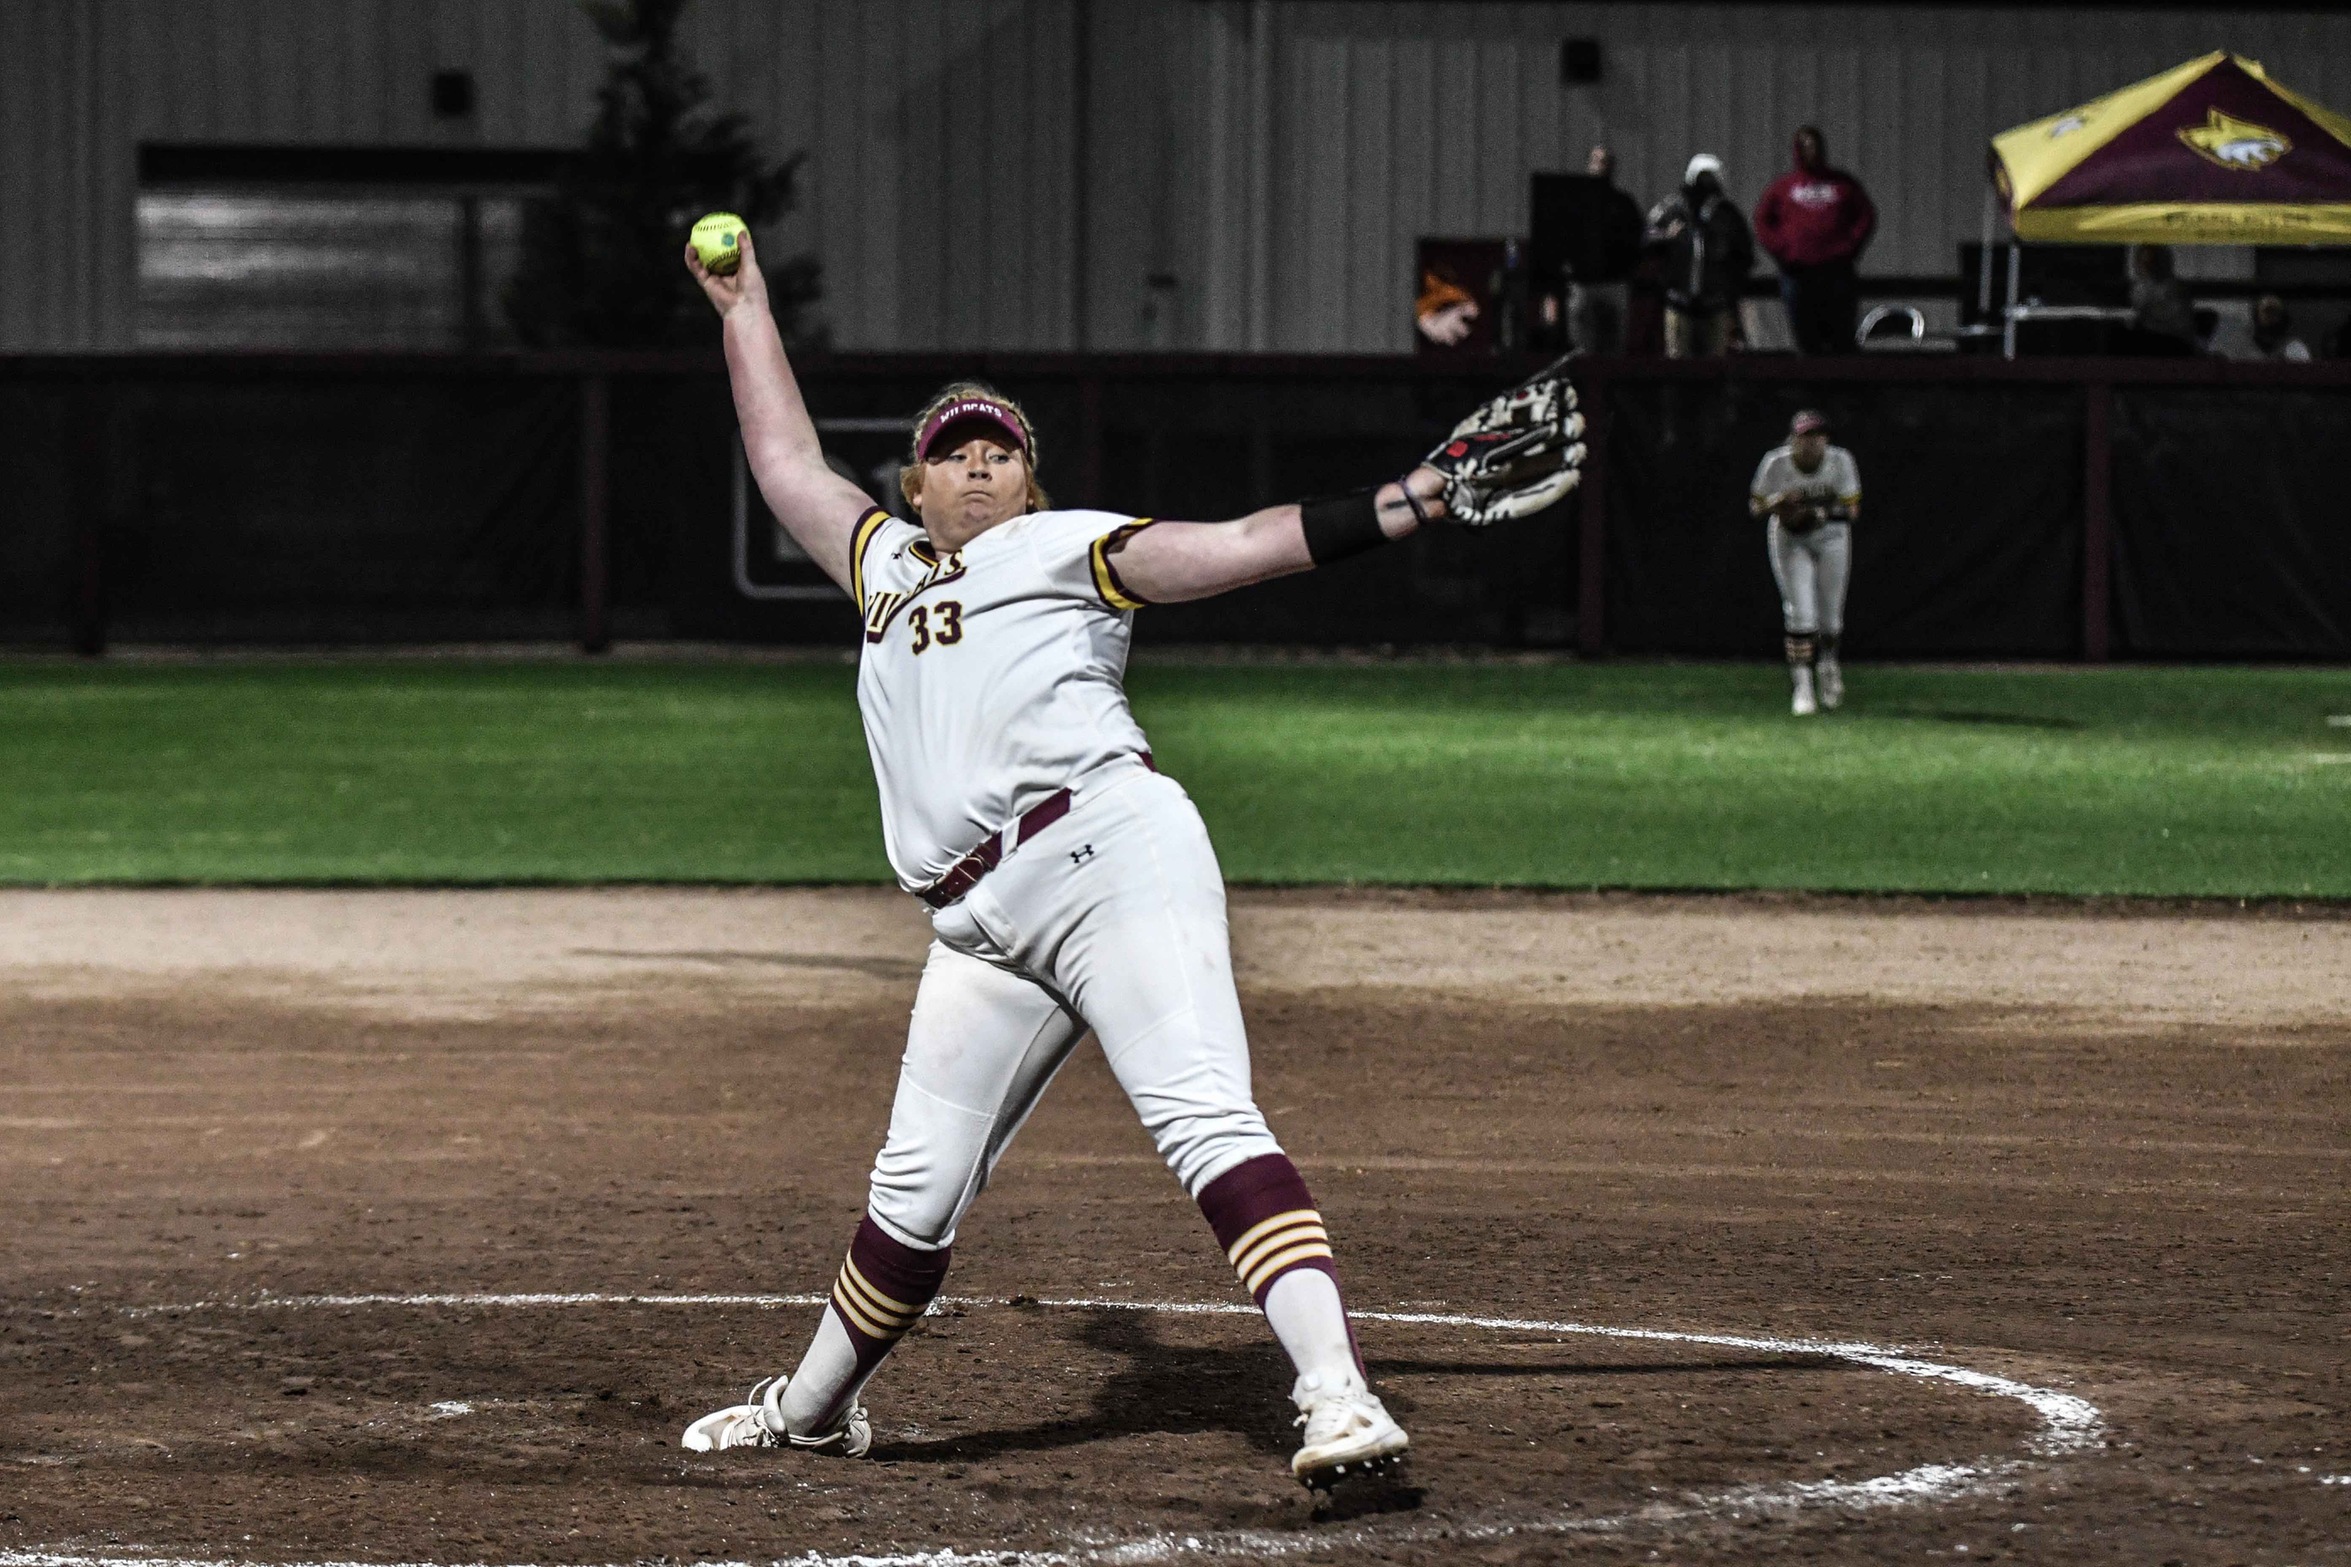 16-strikeout performance highlights No. 17 PRCC’s home debut